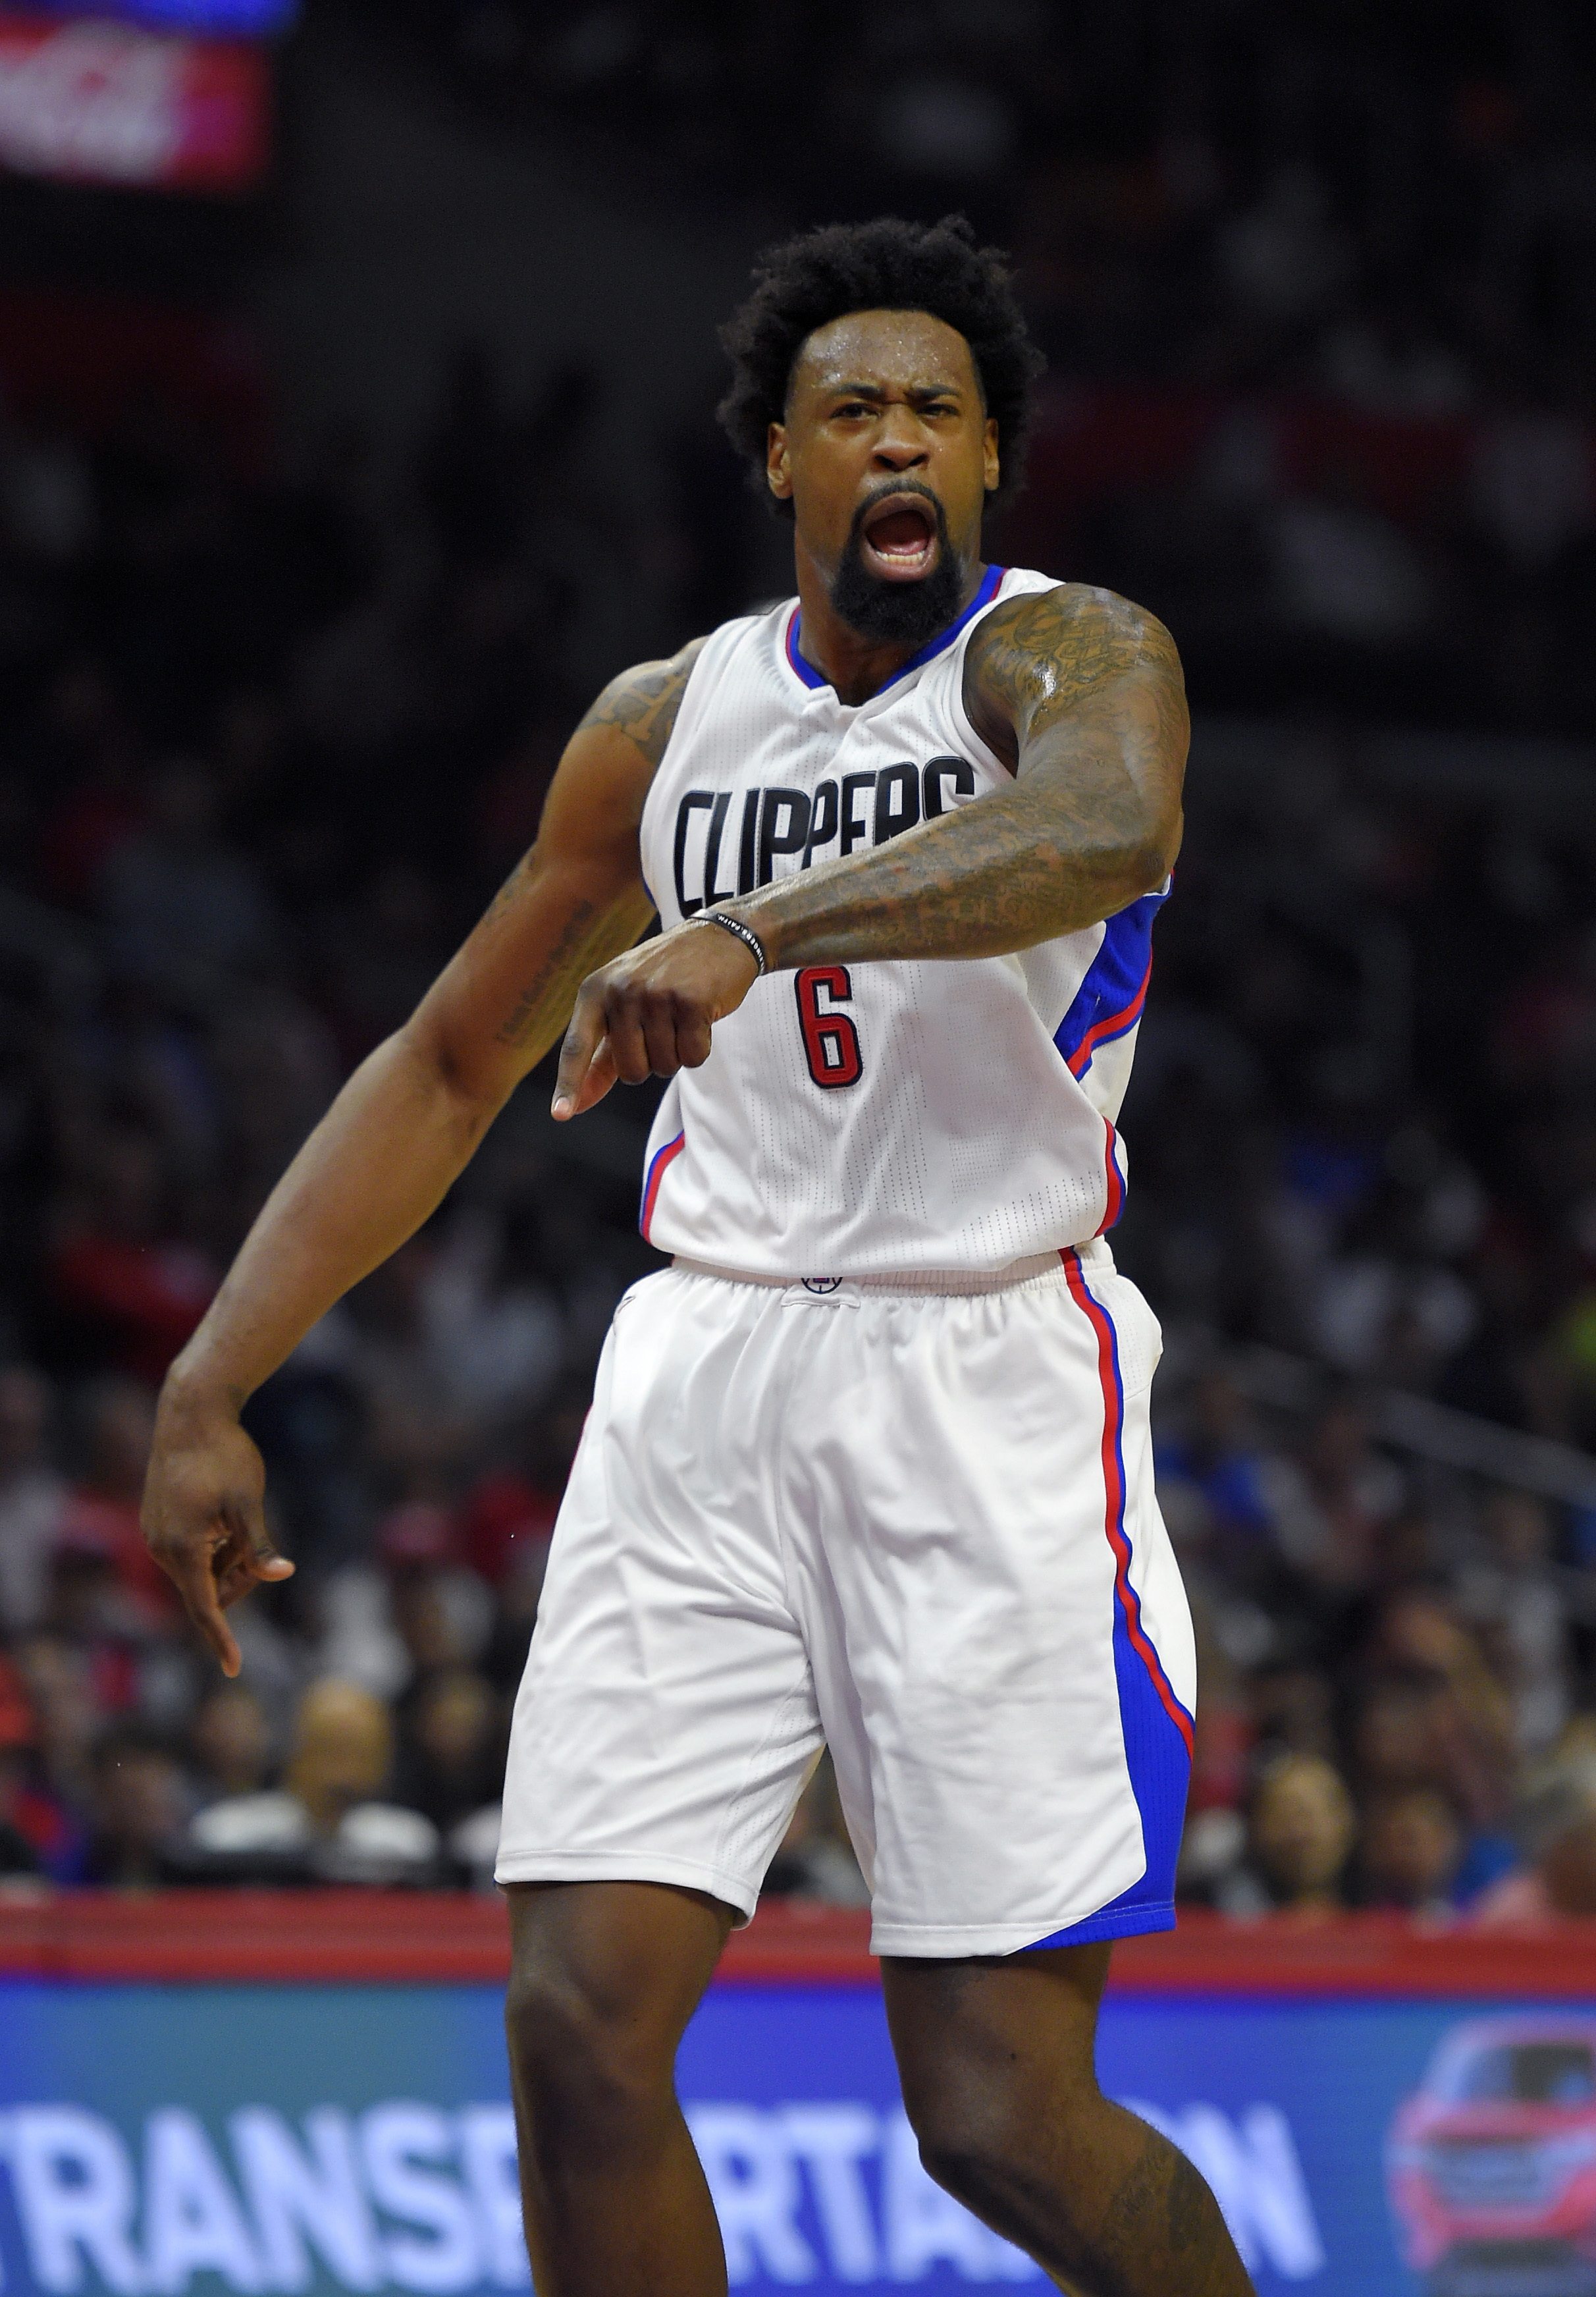 Los Angeles Clippers center DeAndre Jordan complains to referees after scoring during the first half of an NBA basketball game against the Washington Wizards, Sunday, April 3, 2016, in Los Angeles. (AP Photo/Mark J.